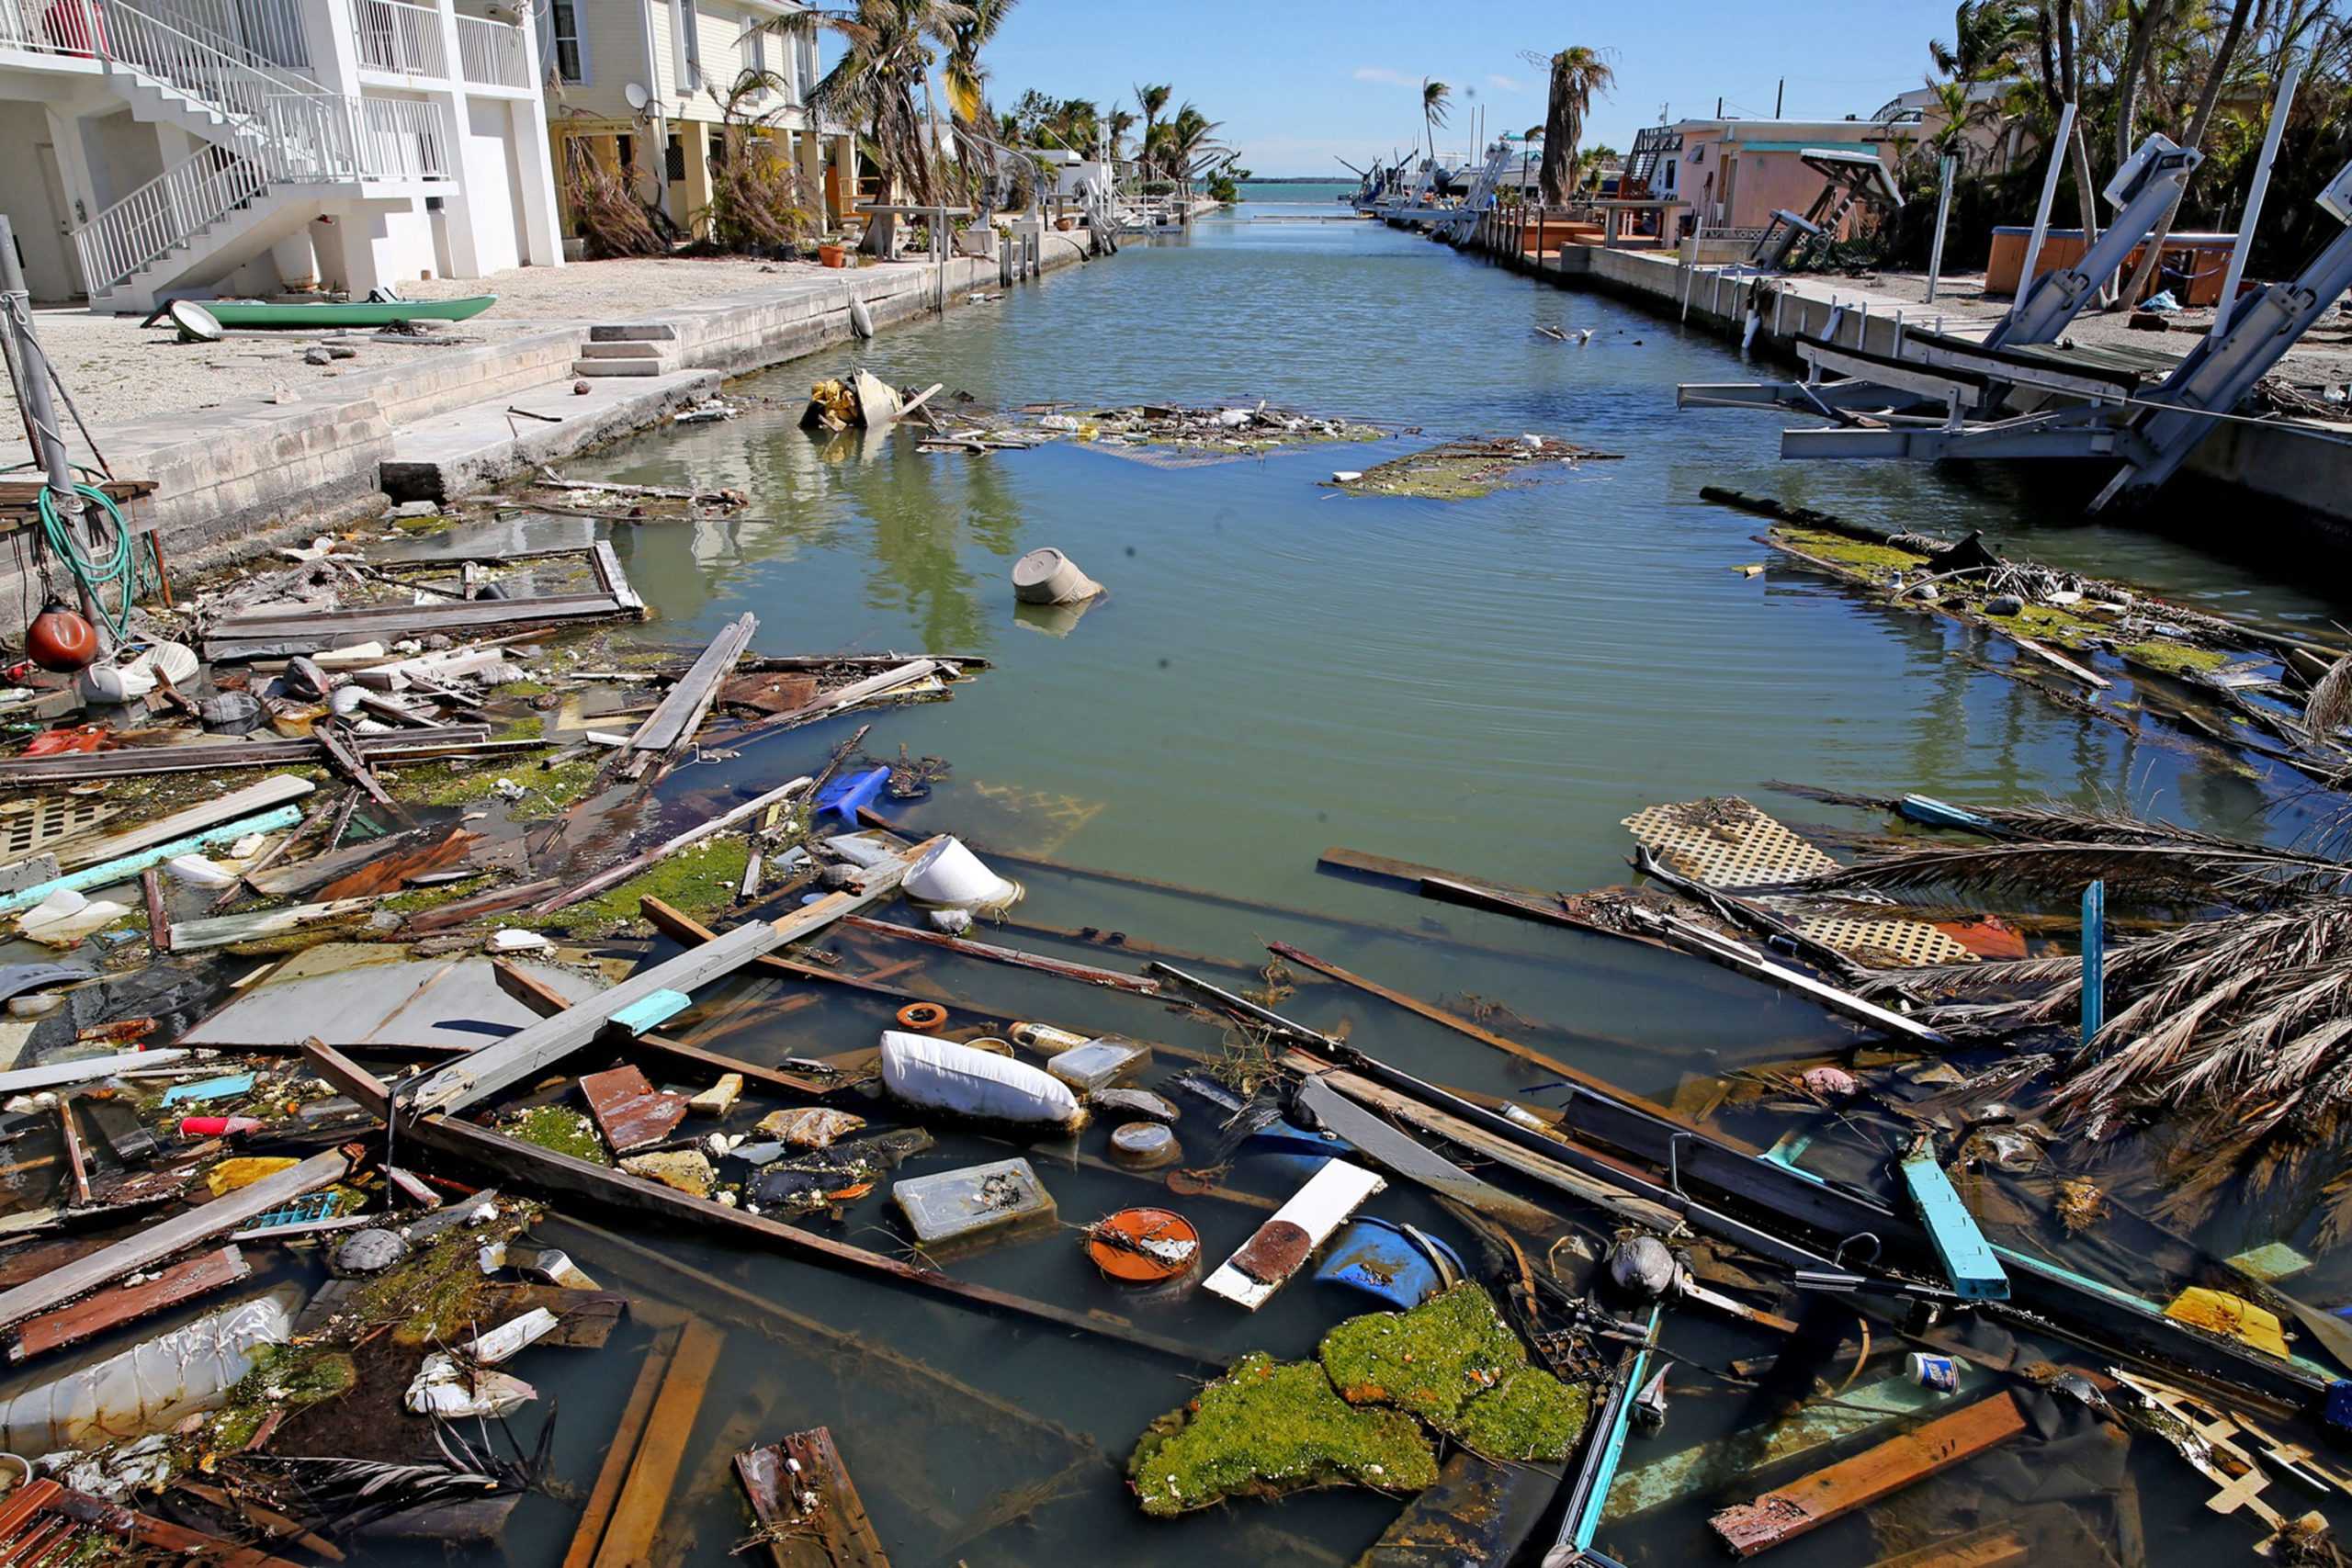 Debris in a canal on Big Pine Key in the Florida Keys, Jan. 18, 2018. The Army Corps of Engineers recently outlined a $3 billion strategy to defend the Keys from future hurricanes and sea level rise. (Charles Trainor Jr./Miami Herald/TNS)